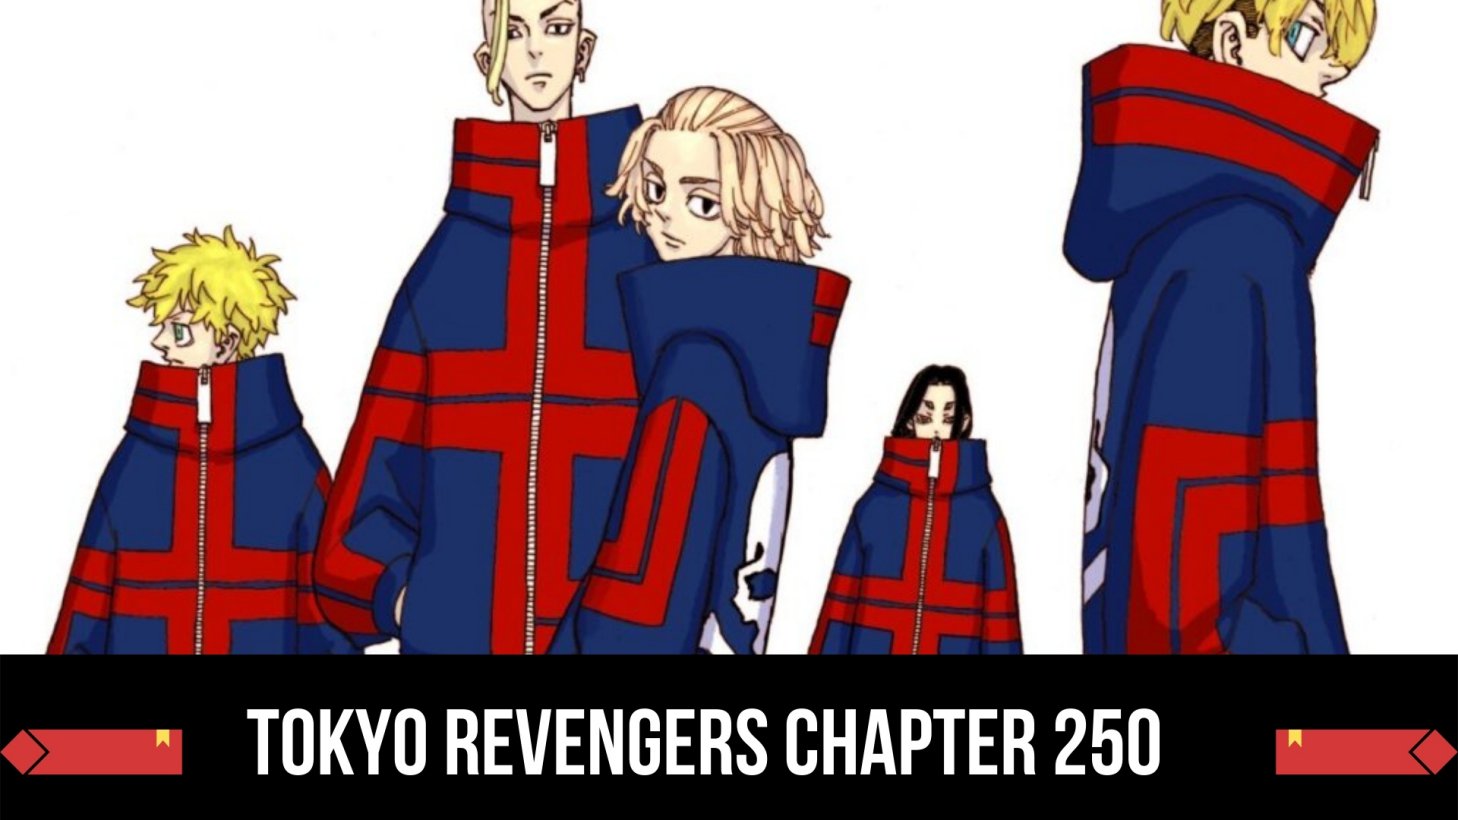 Tokyo Revengers Chapter 250 Release Date, Time, Raw Scans, Manga Spoilers, Leaks & Latest Updates